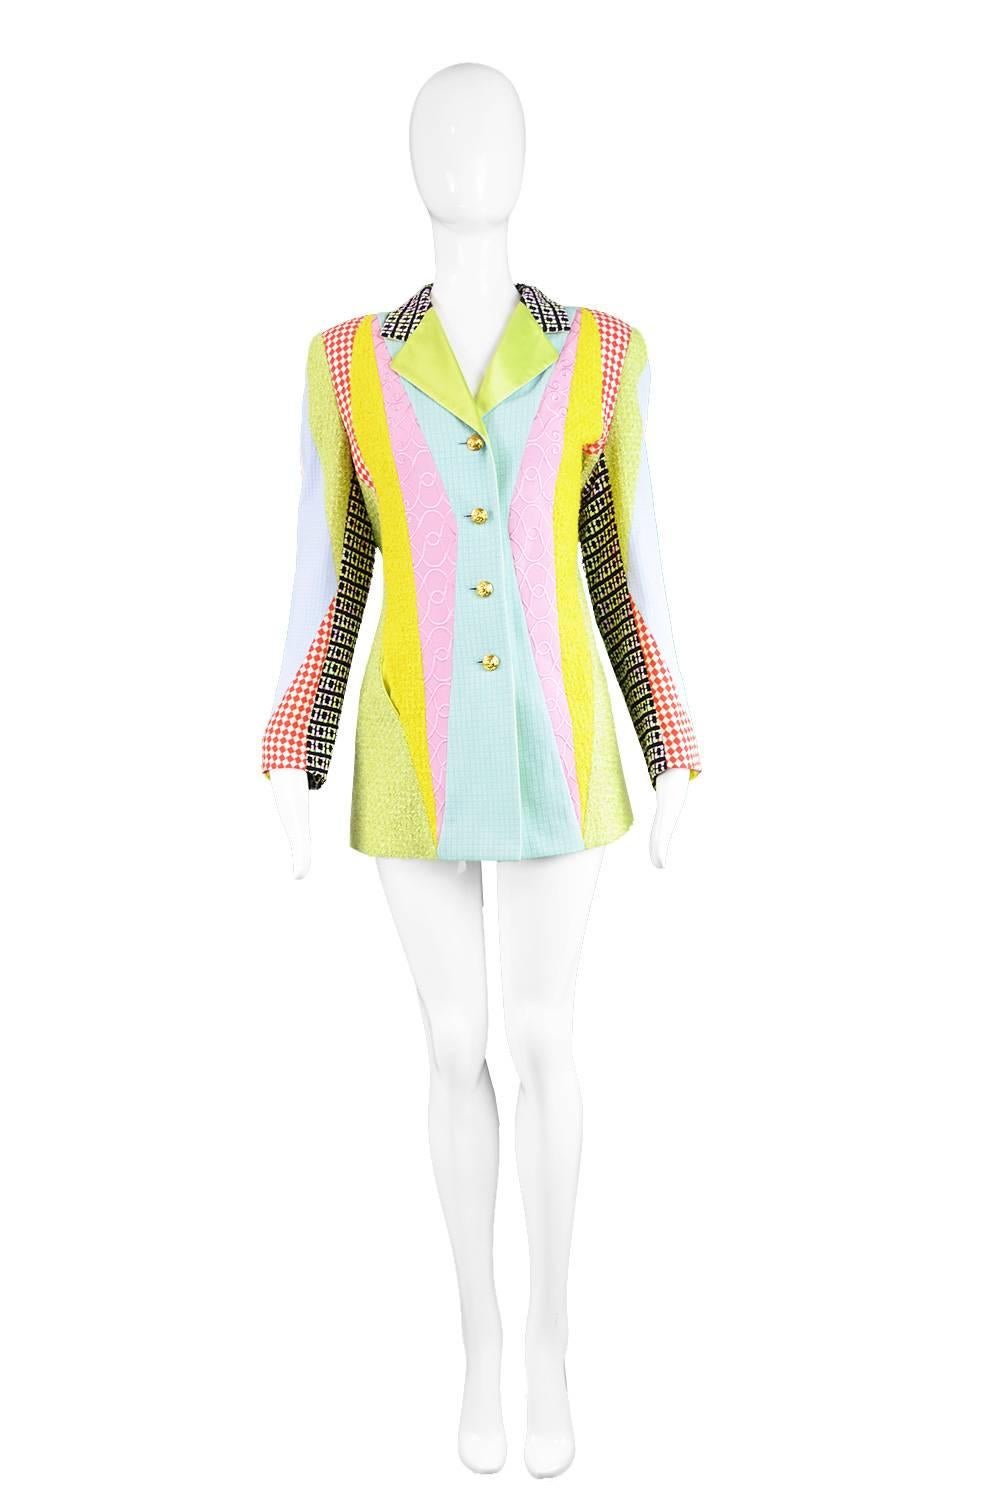 A beautiful and striking vintage women's blazer from the 80s by luxury designer, Margaretha Ley for Escada. With bold panels of couture quality fabrics including tweed boucle, green and yellow satin, pink embroidery and matelassé and red and white